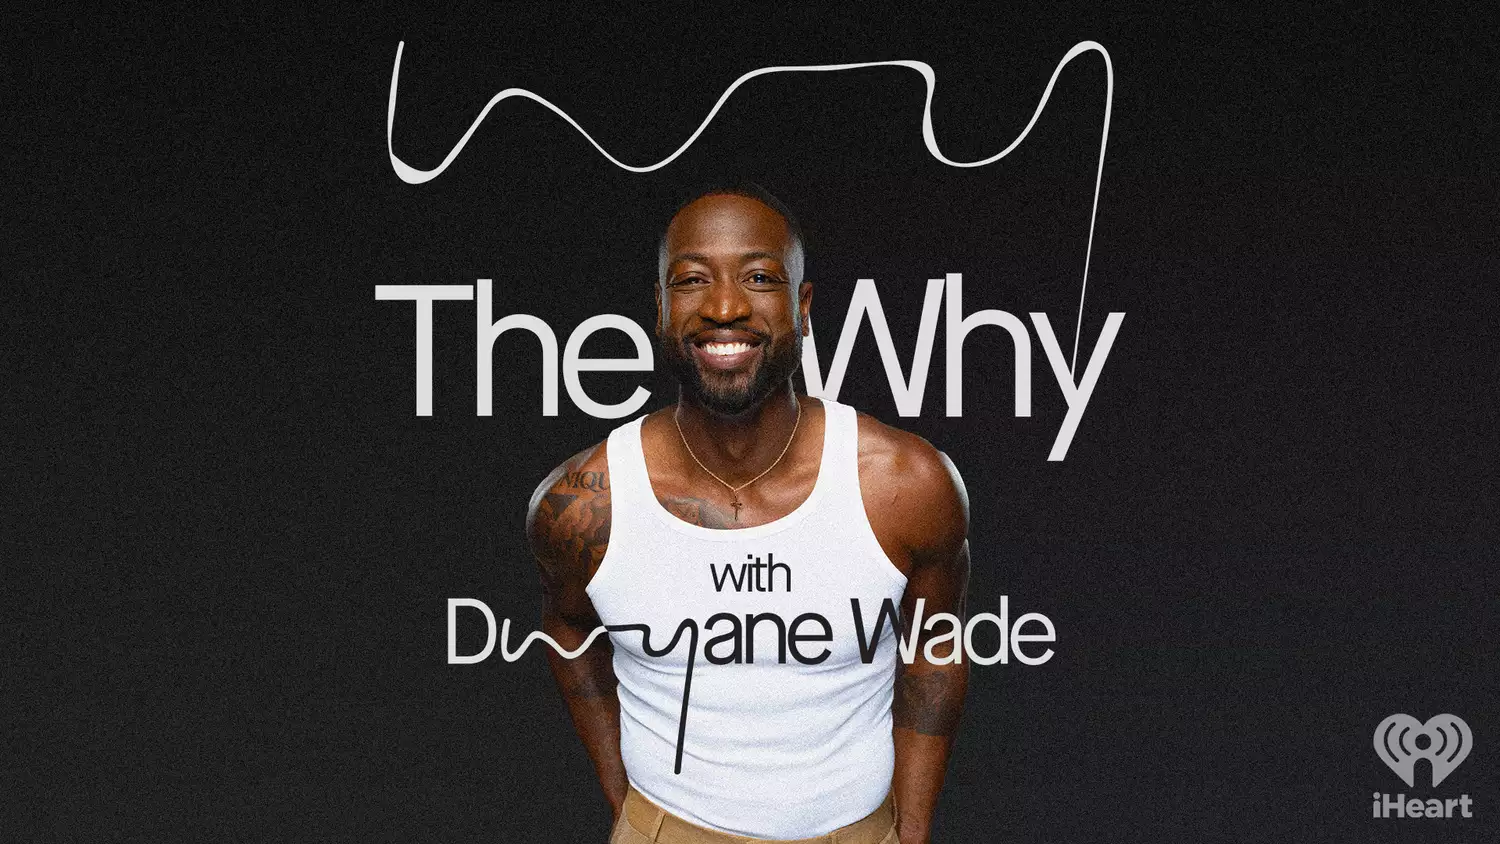 The official cover poster for Dwyane Wade's new podcast series, The Why with Dwyane Wade